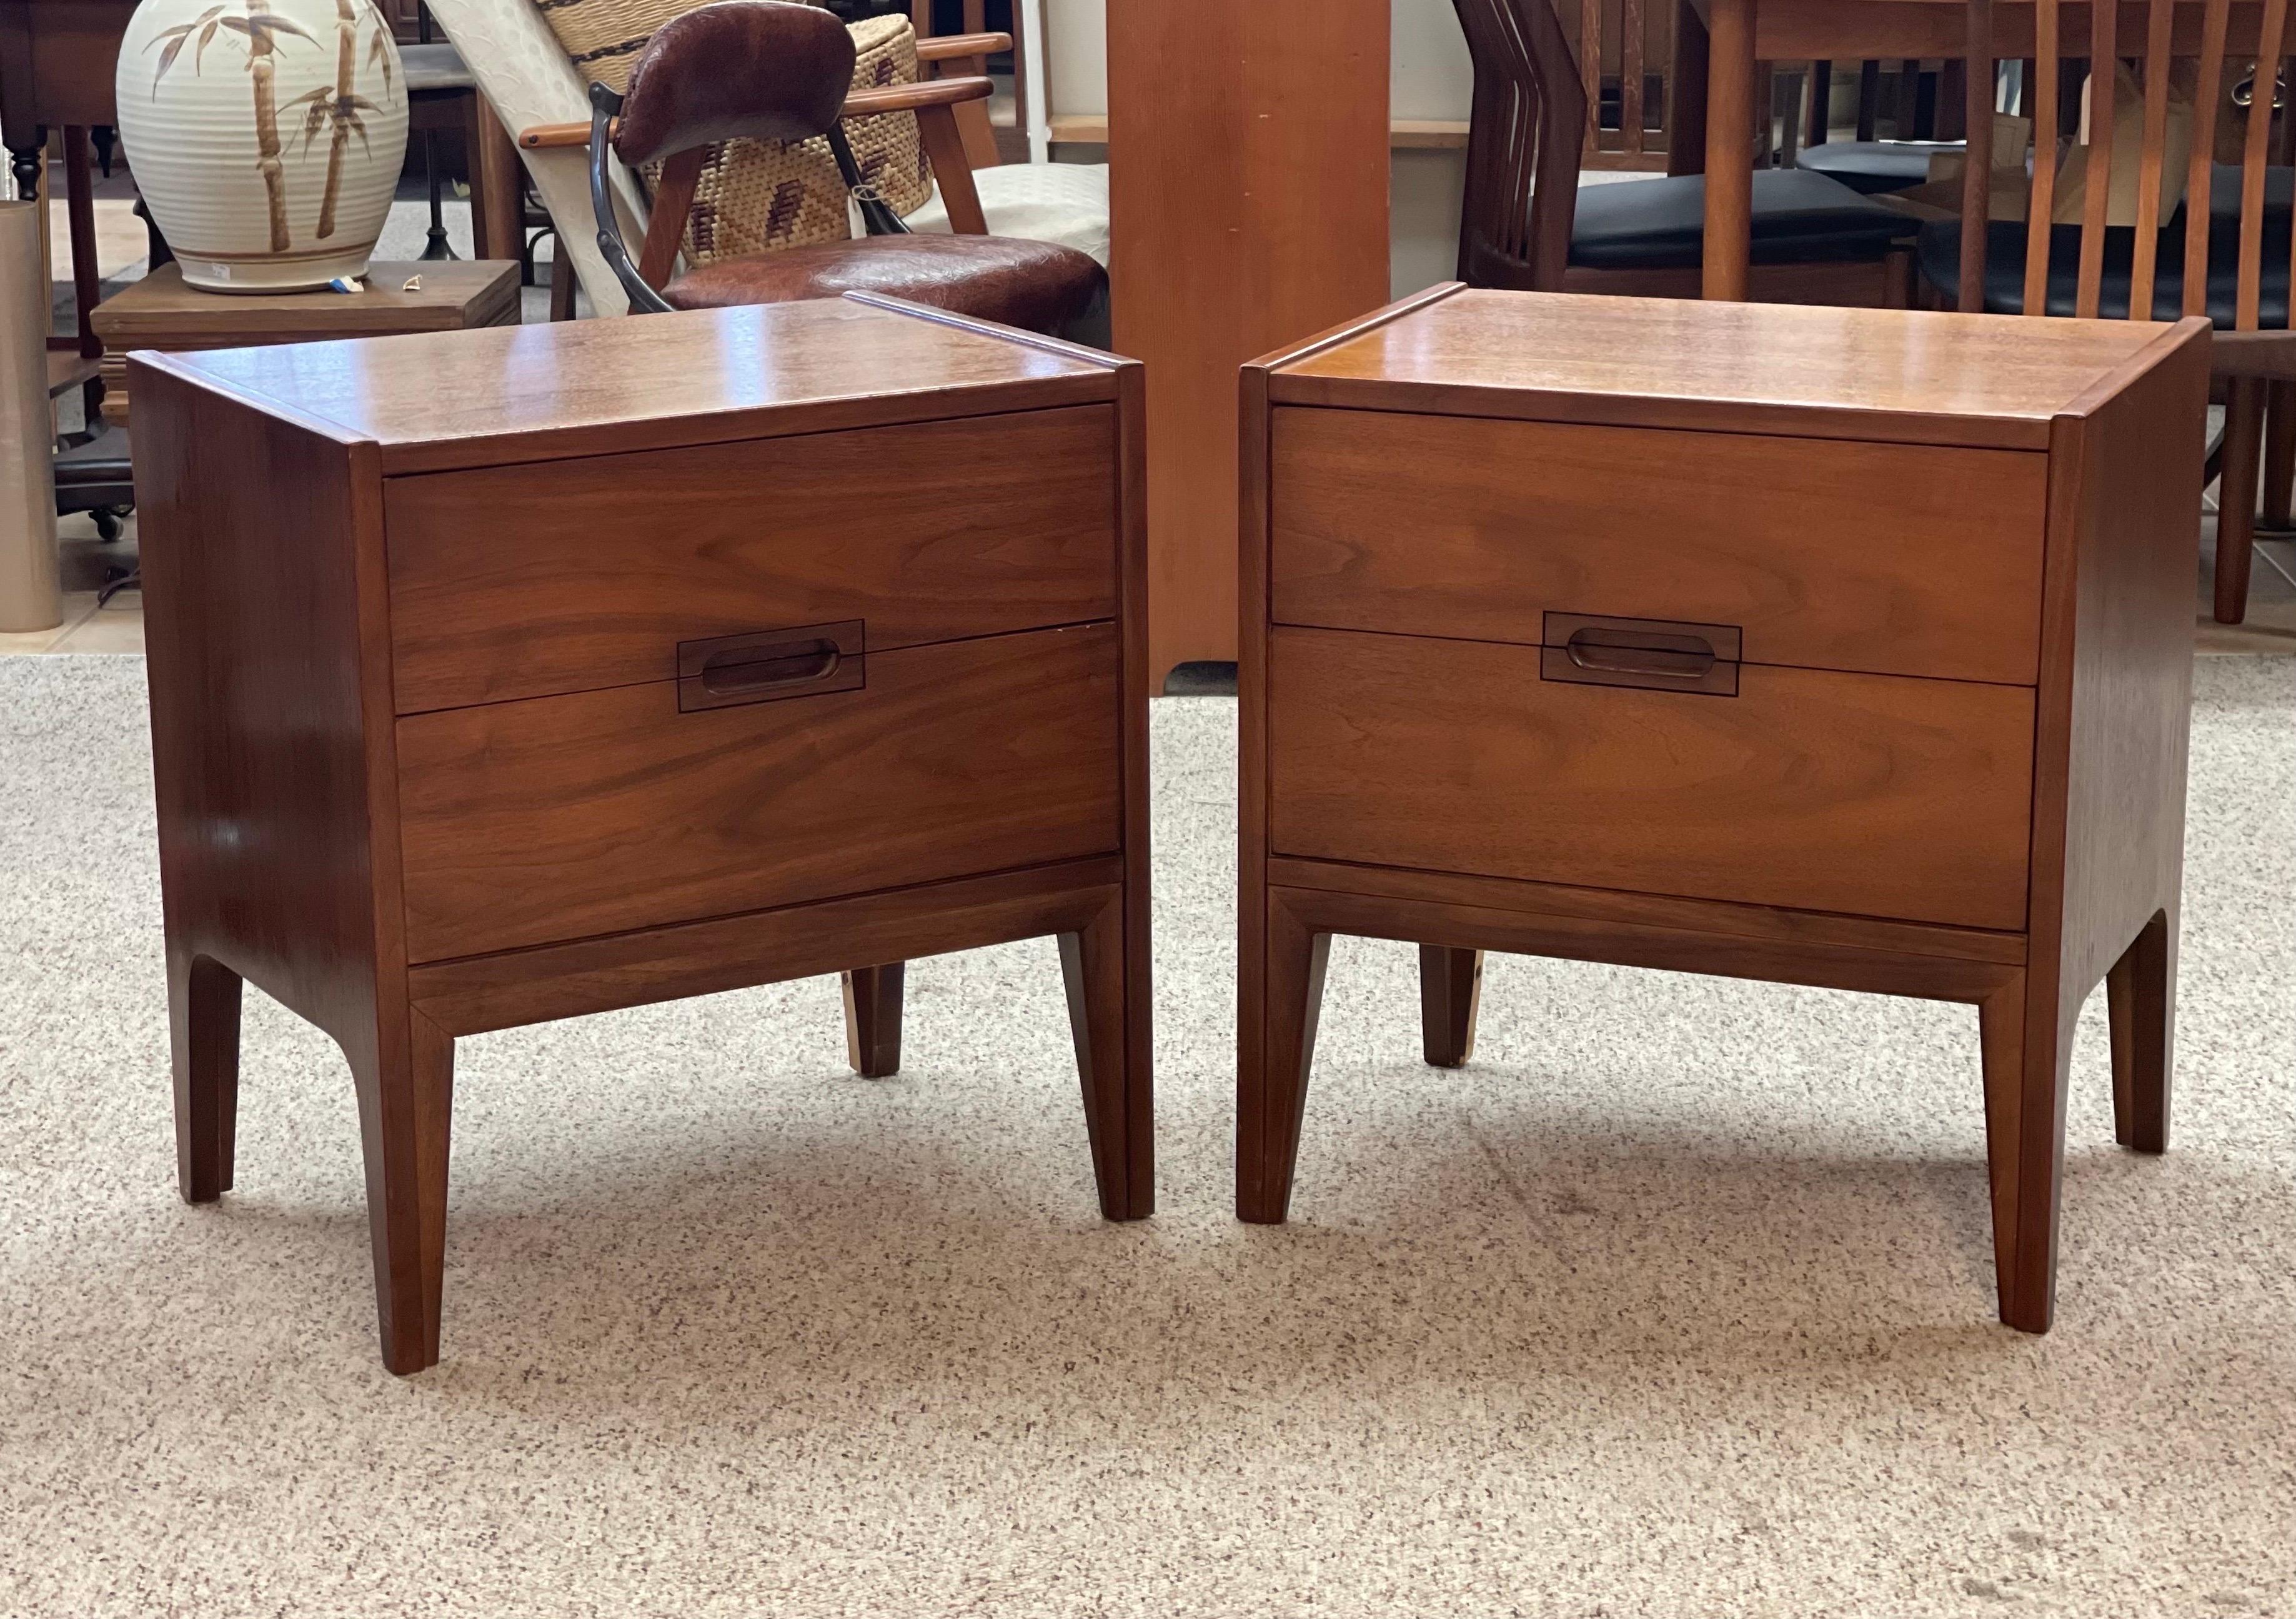 Vintage Mid-Century Modern Accent Tables Dovetail Drawers 

Dimensions. 22 W ; 16 D ; 23 1/2 H.